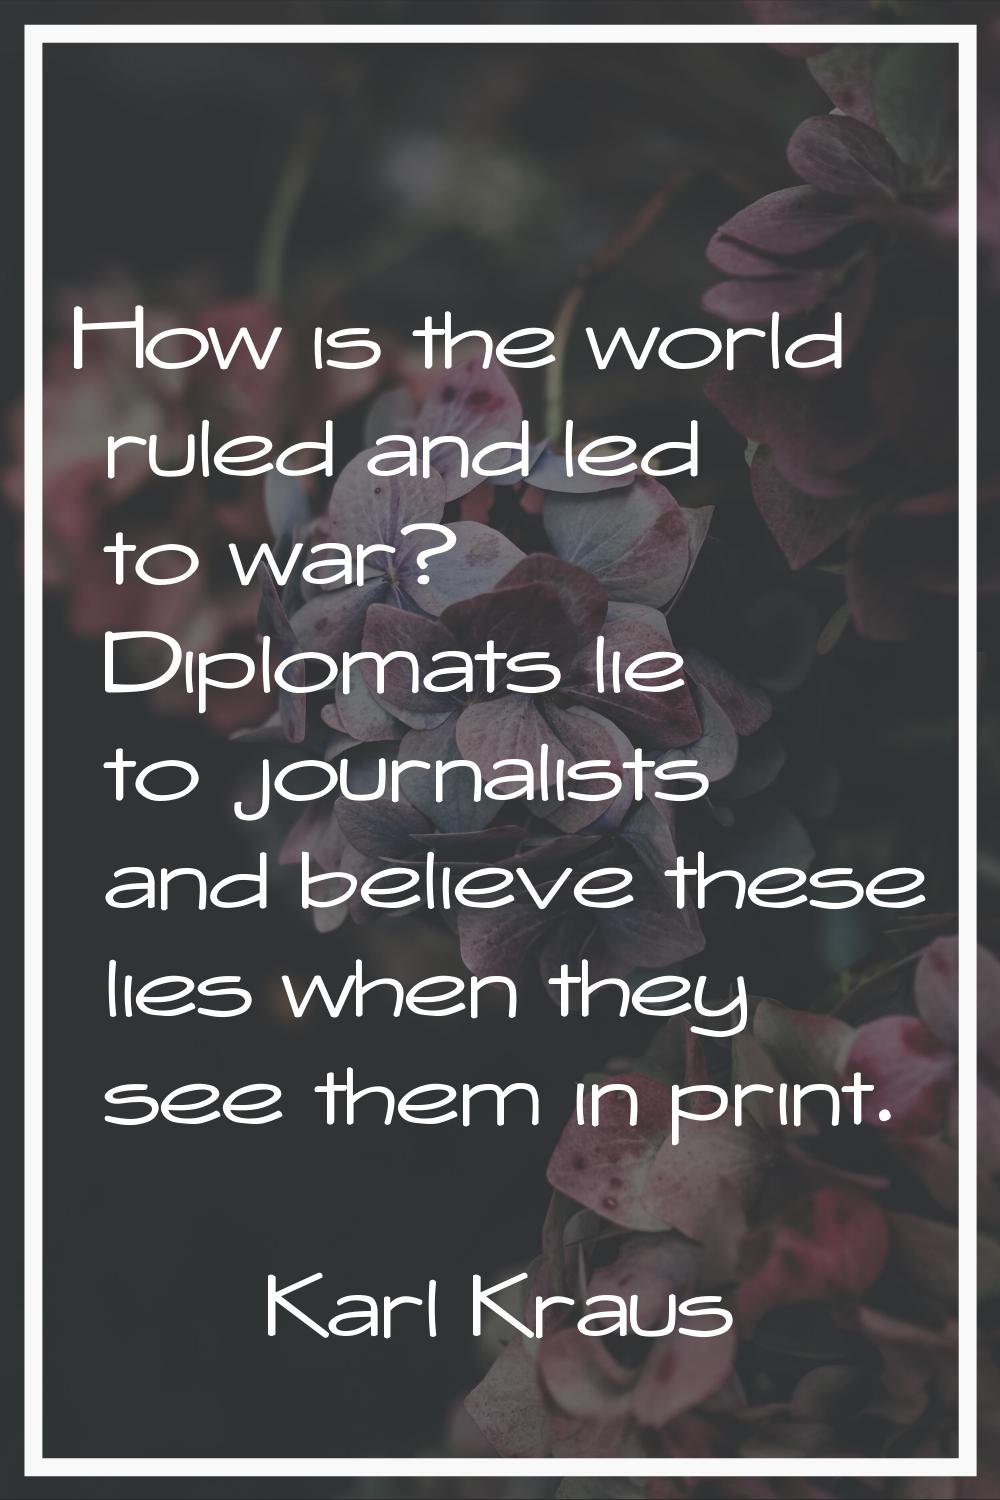 How is the world ruled and led to war? Diplomats lie to journalists and believe these lies when the